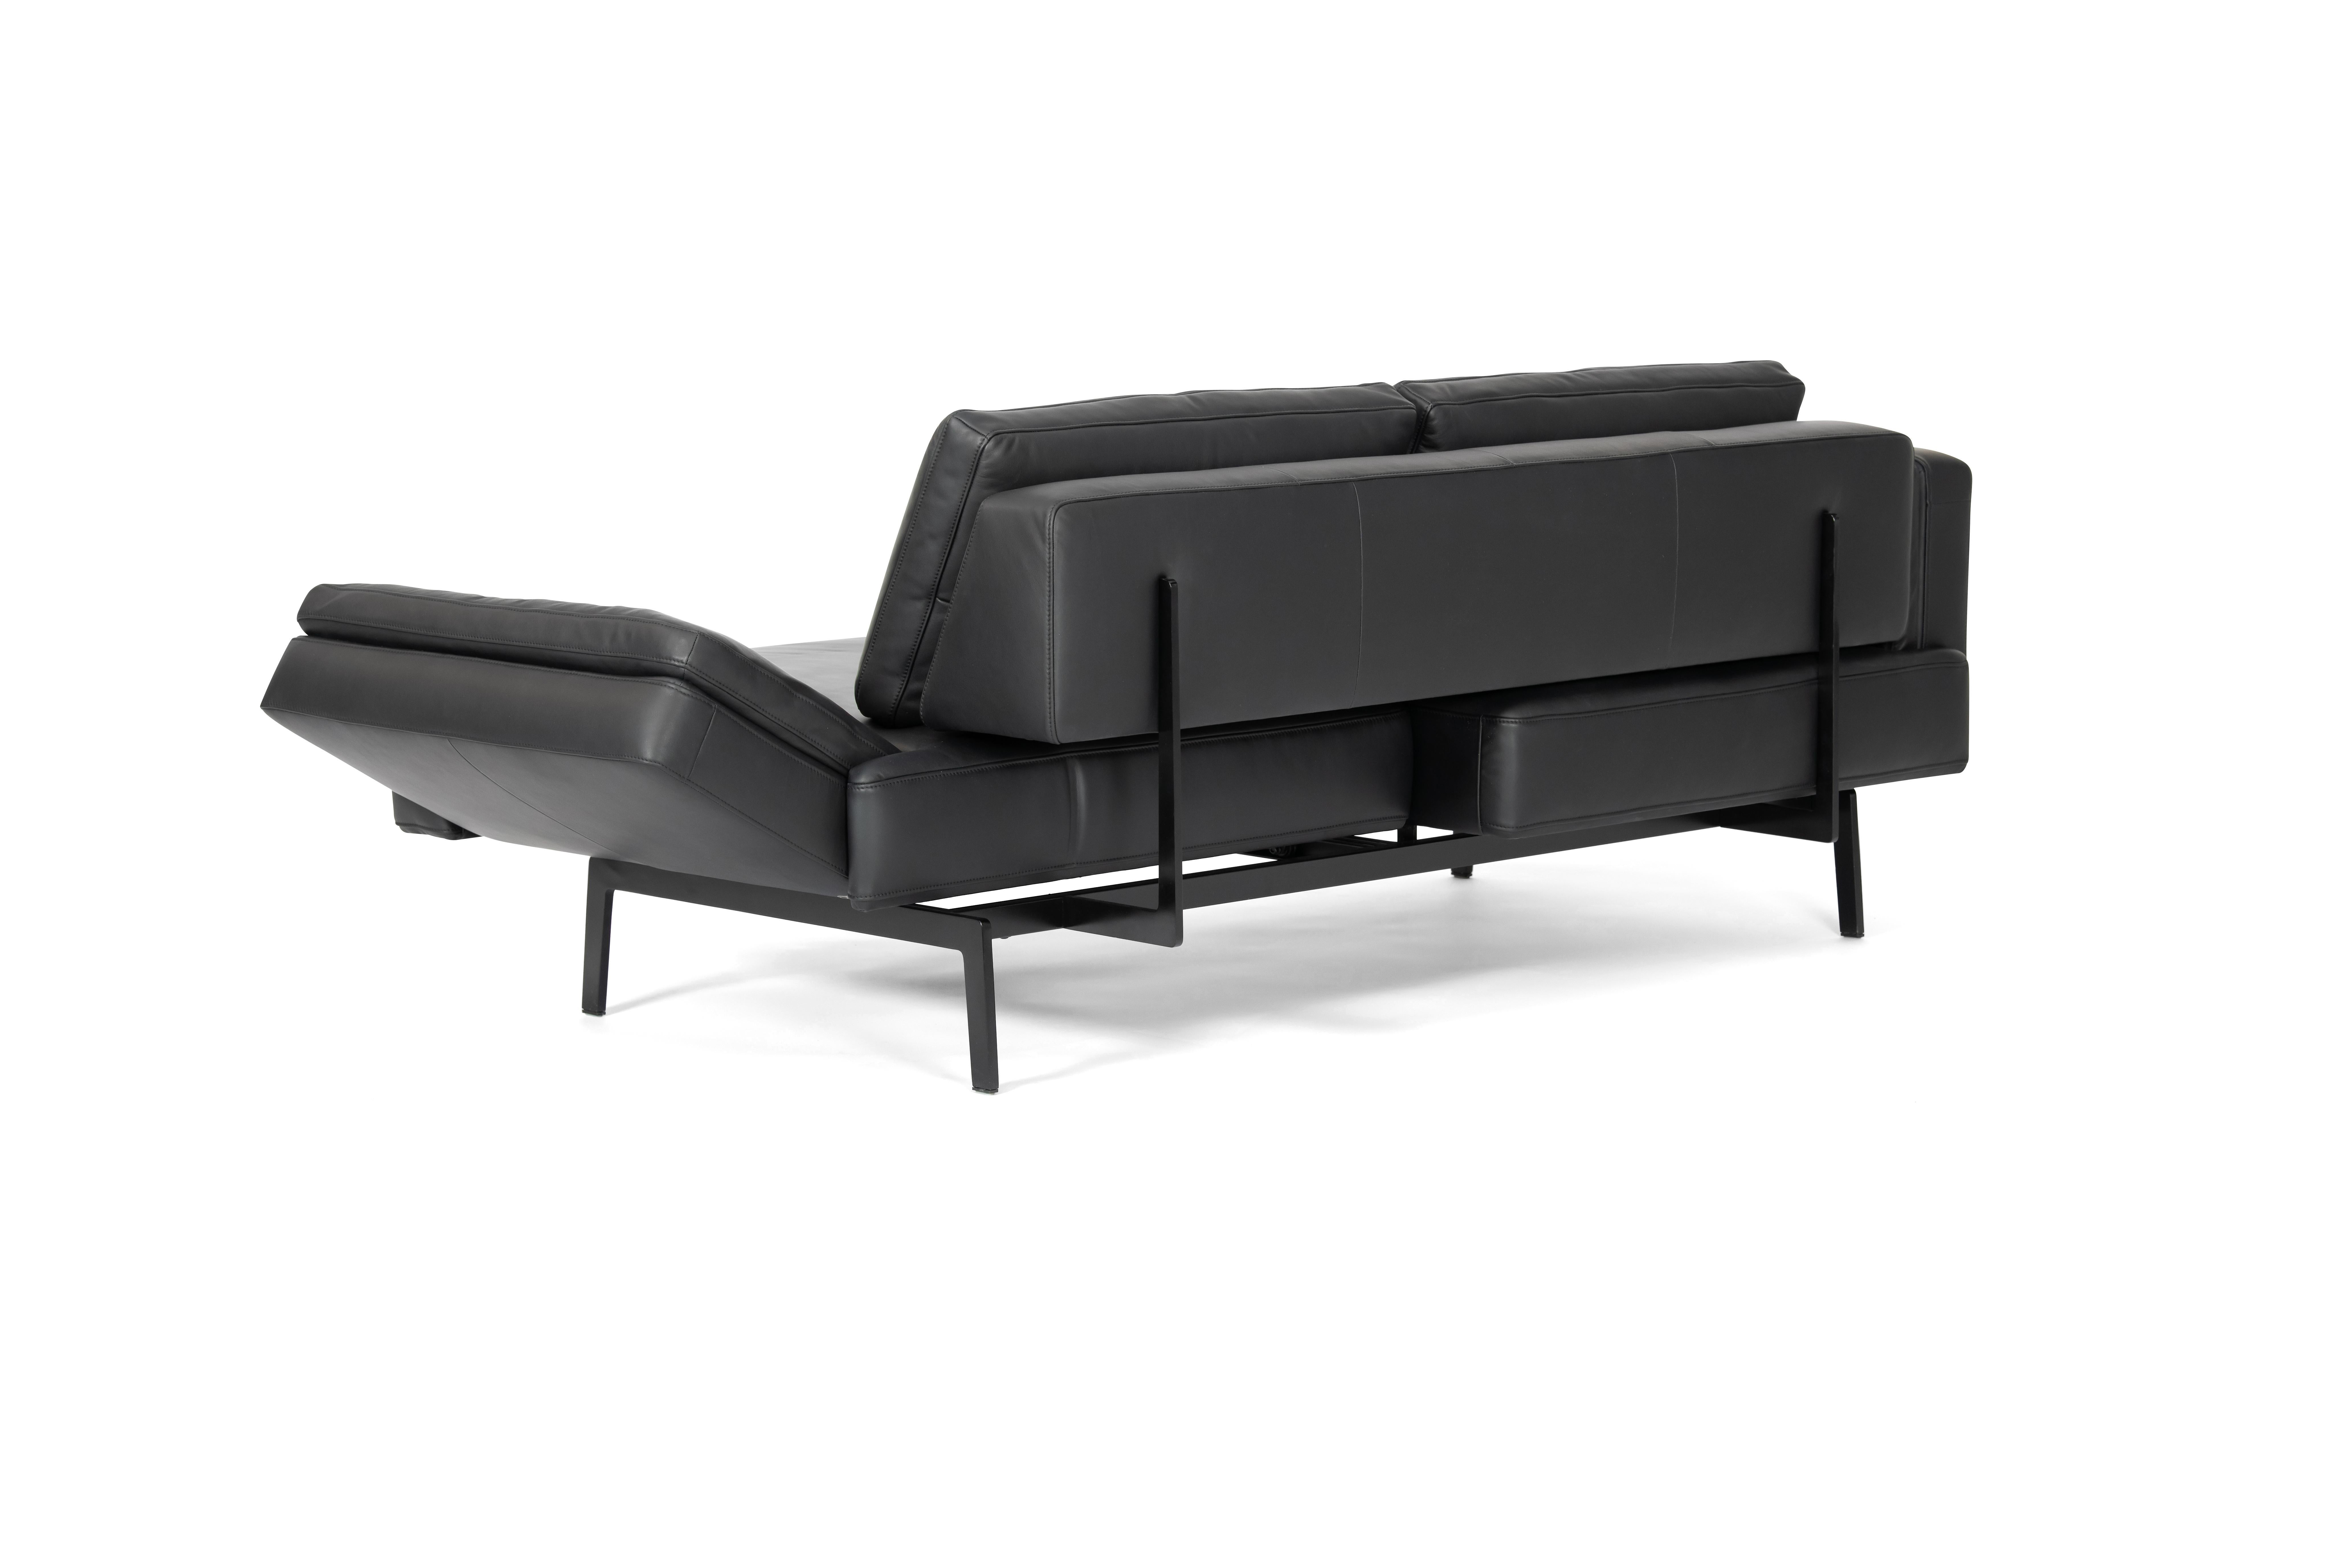 Contemporary DeSede Ds-747/04 Multifunctional Sofa in Black Leather Seat and Back Upholstery For Sale